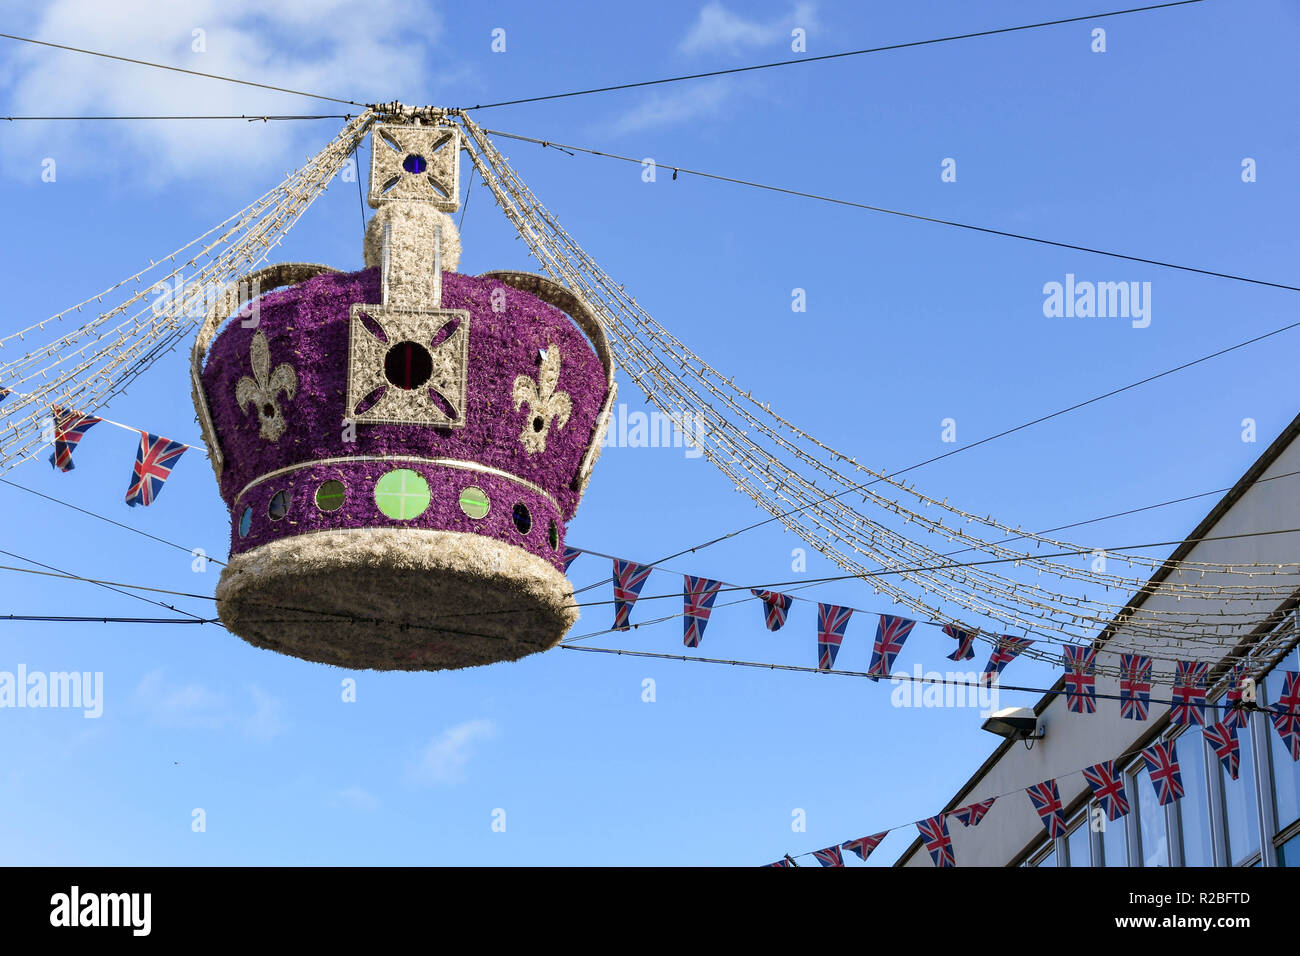 WINDSOR, ENGLAND - NOVEMBER 2018: Large regal crown suspended from wires over a street in Windsor town centre as part of its Christmas decorations. Stock Photo